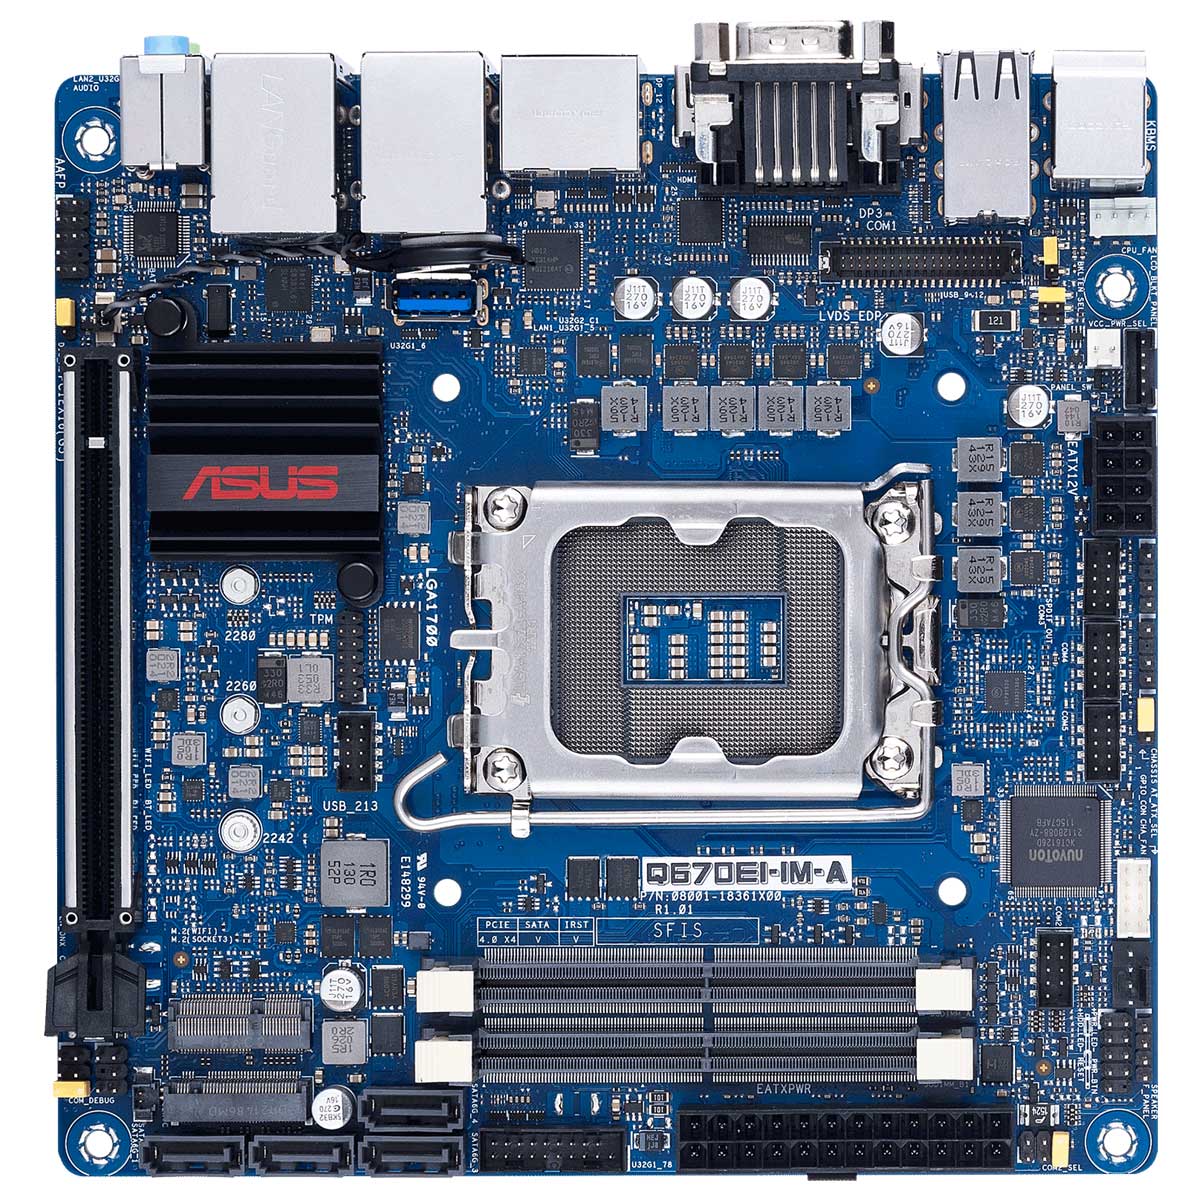 Lga 1700 itx. ASUS Industrial mainboard EATX 2066. Only for 845e Chipset.